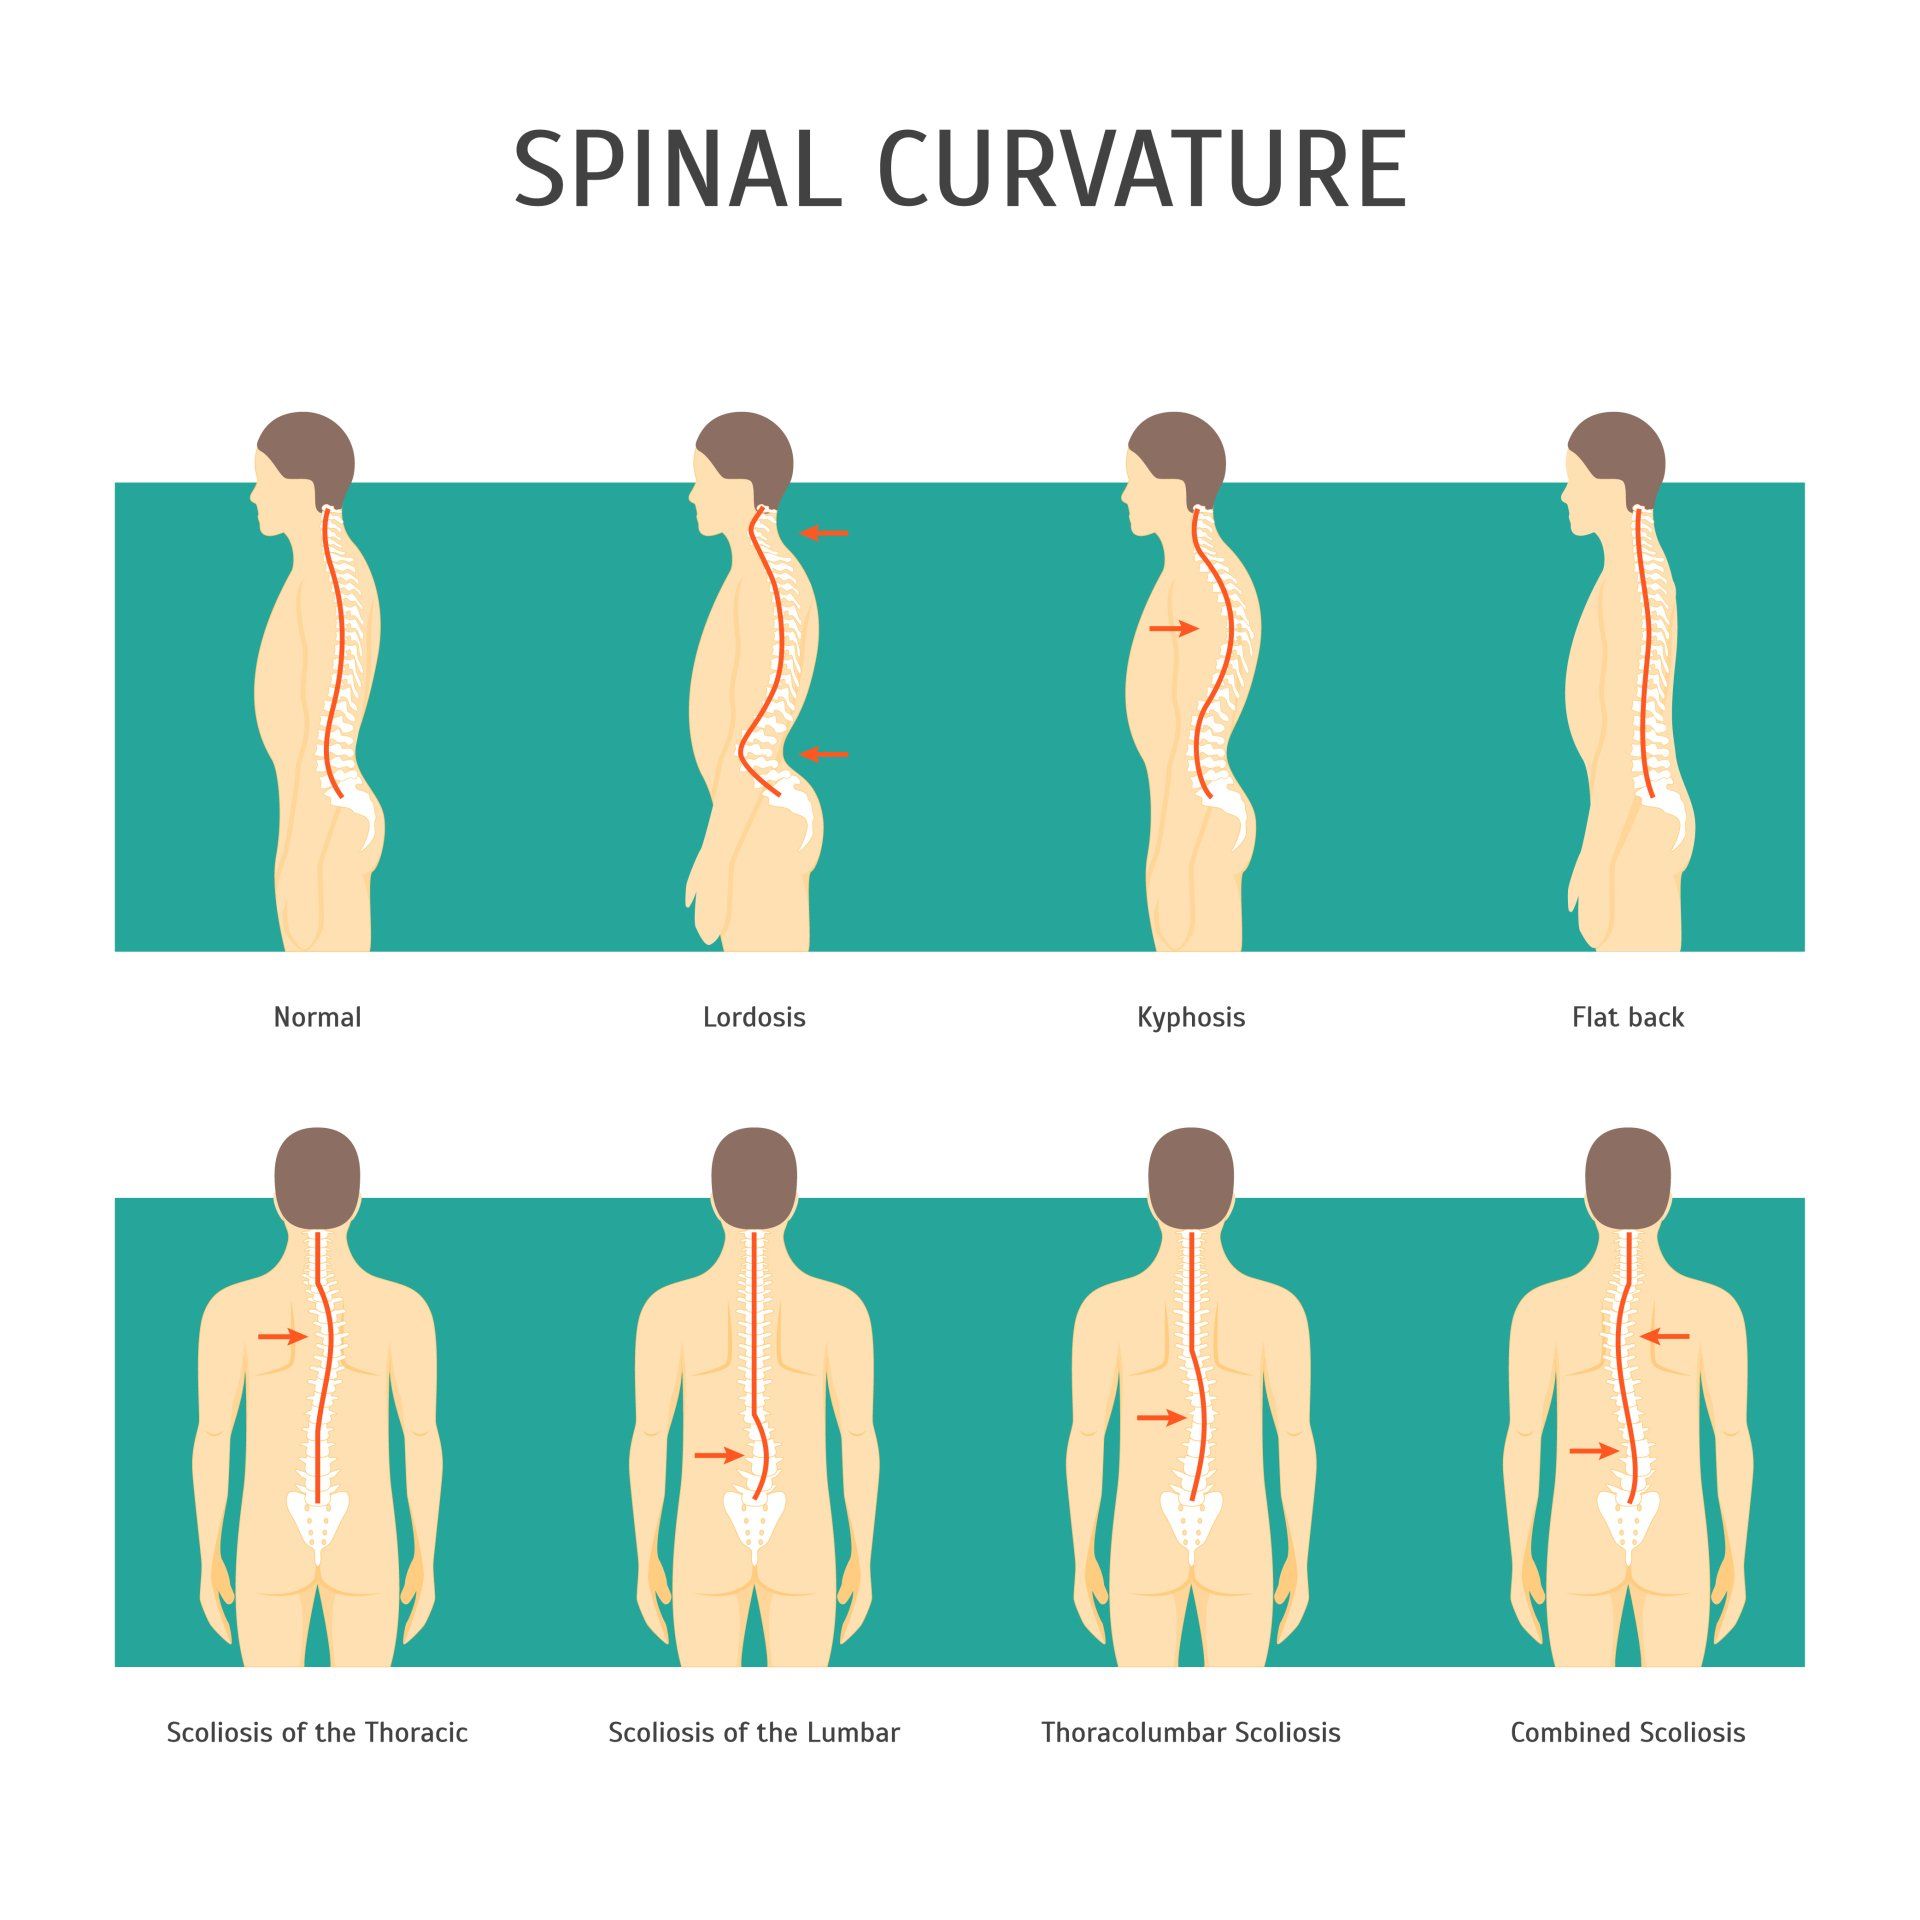 Curvatures of the spine